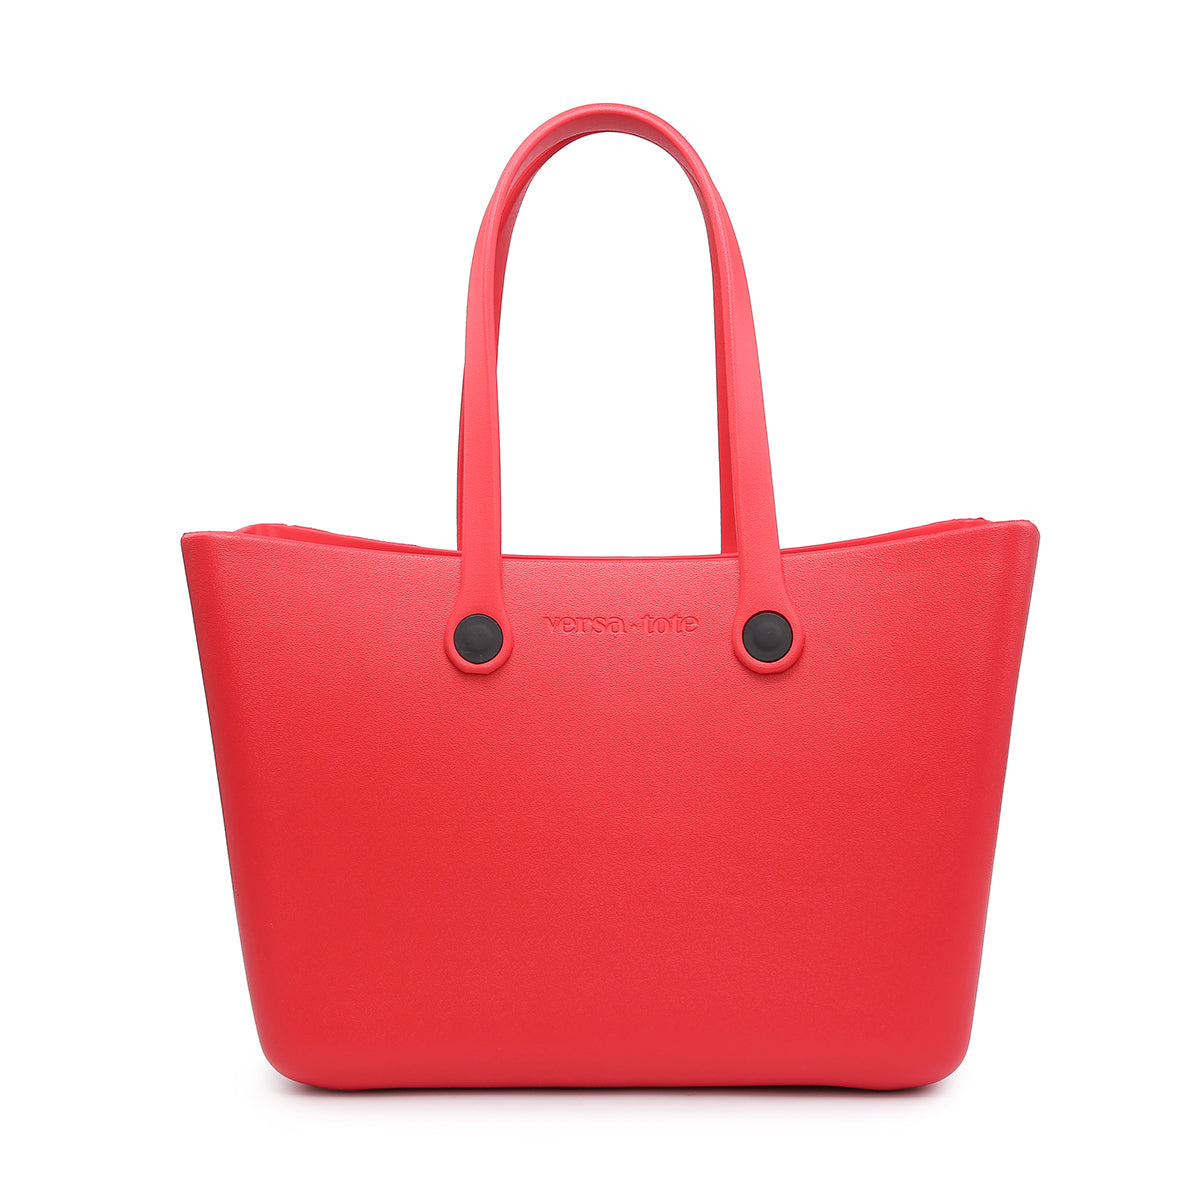 Sac fourre-tout - Carrie All tote (Red)